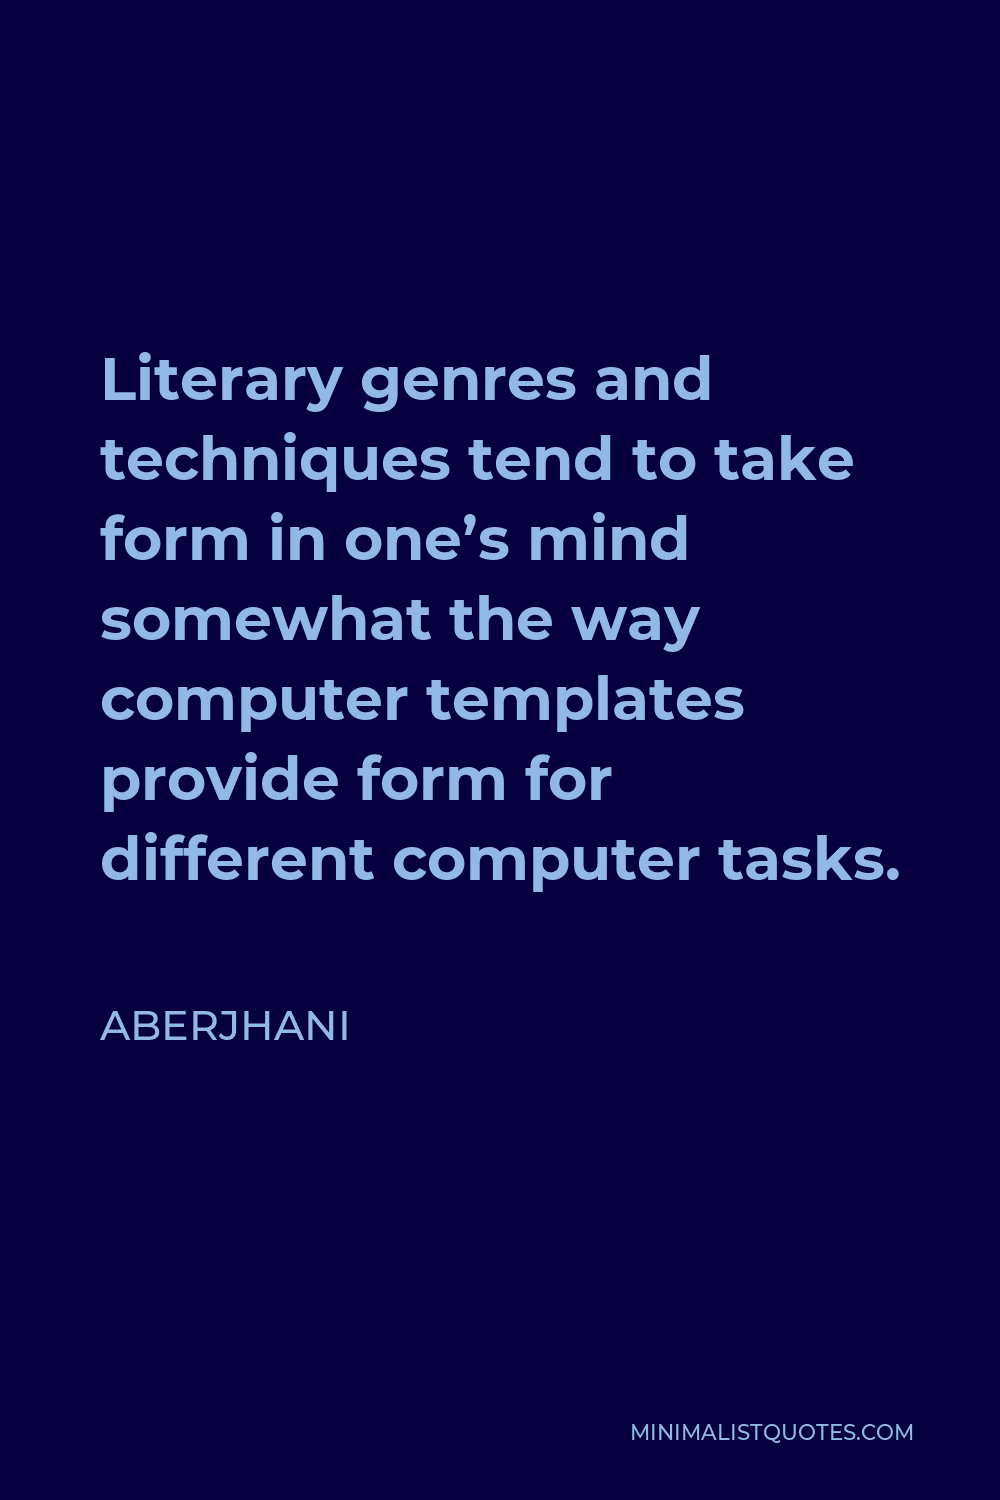 Aberjhani Quote - Literary genres and techniques tend to take form in one’s mind somewhat the way computer templates provide form for different computer tasks.